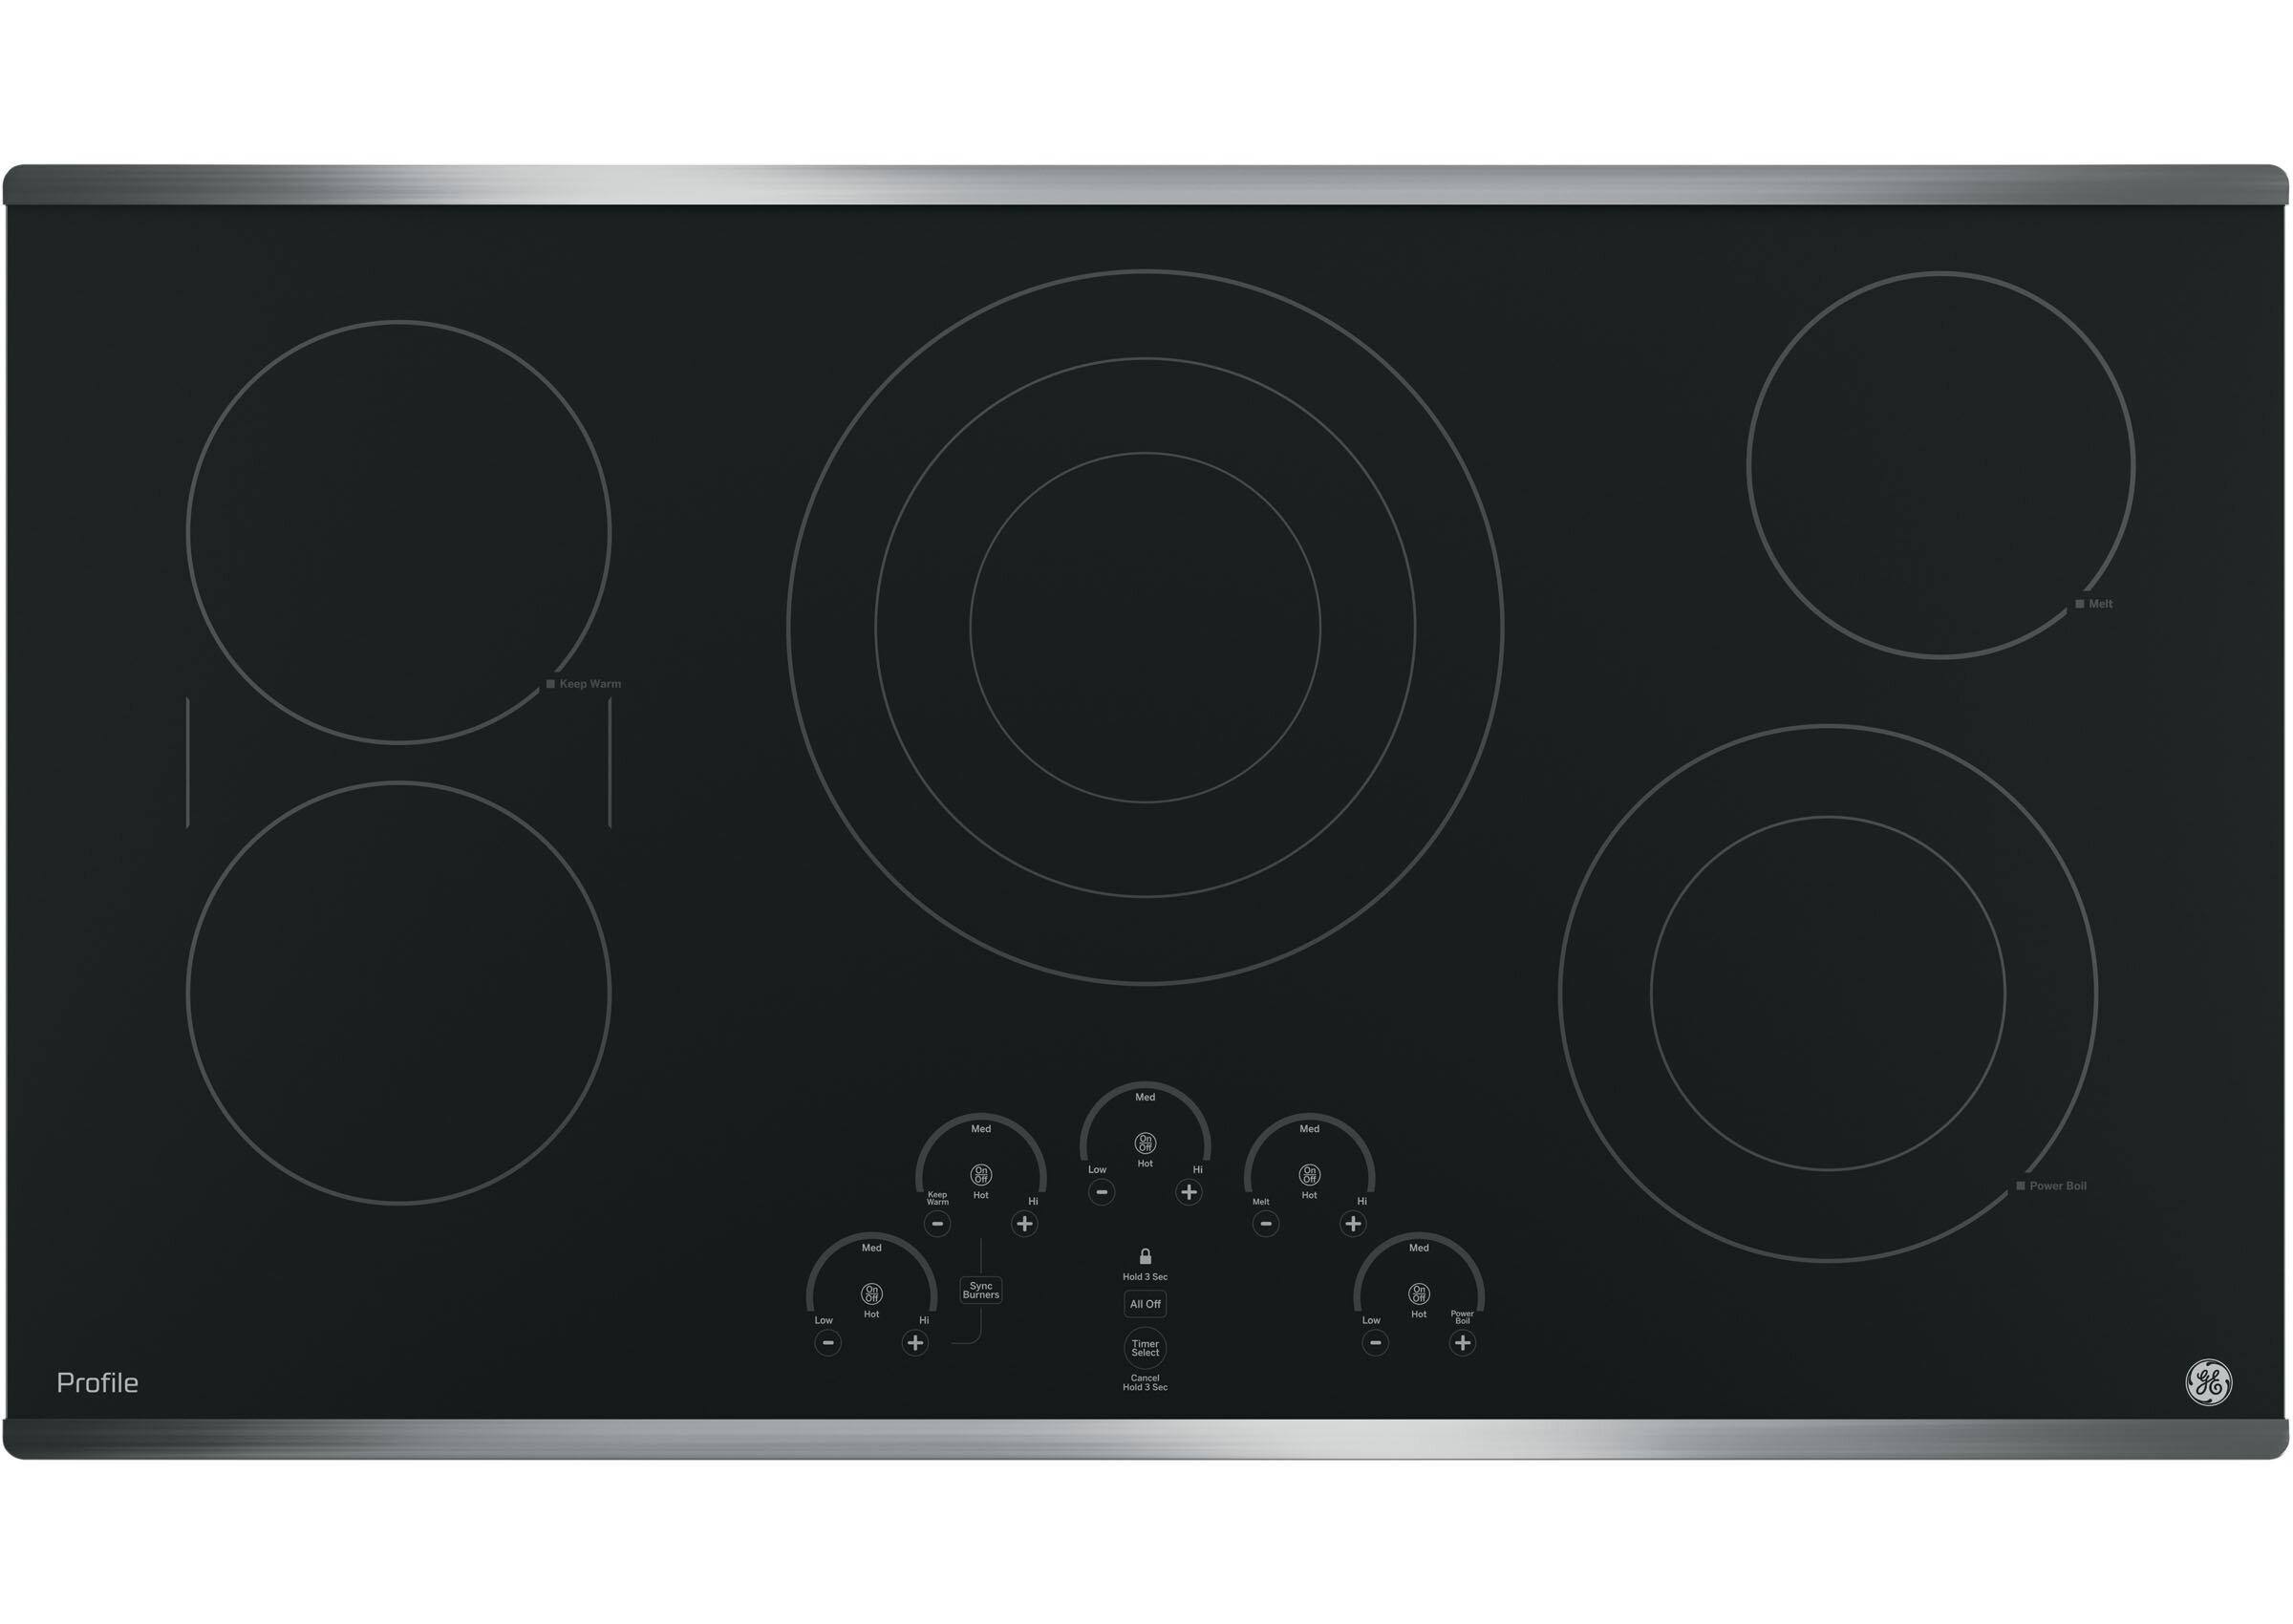 Ge Profile Range 36 Electric Cooktop With 5 Burners Reviews